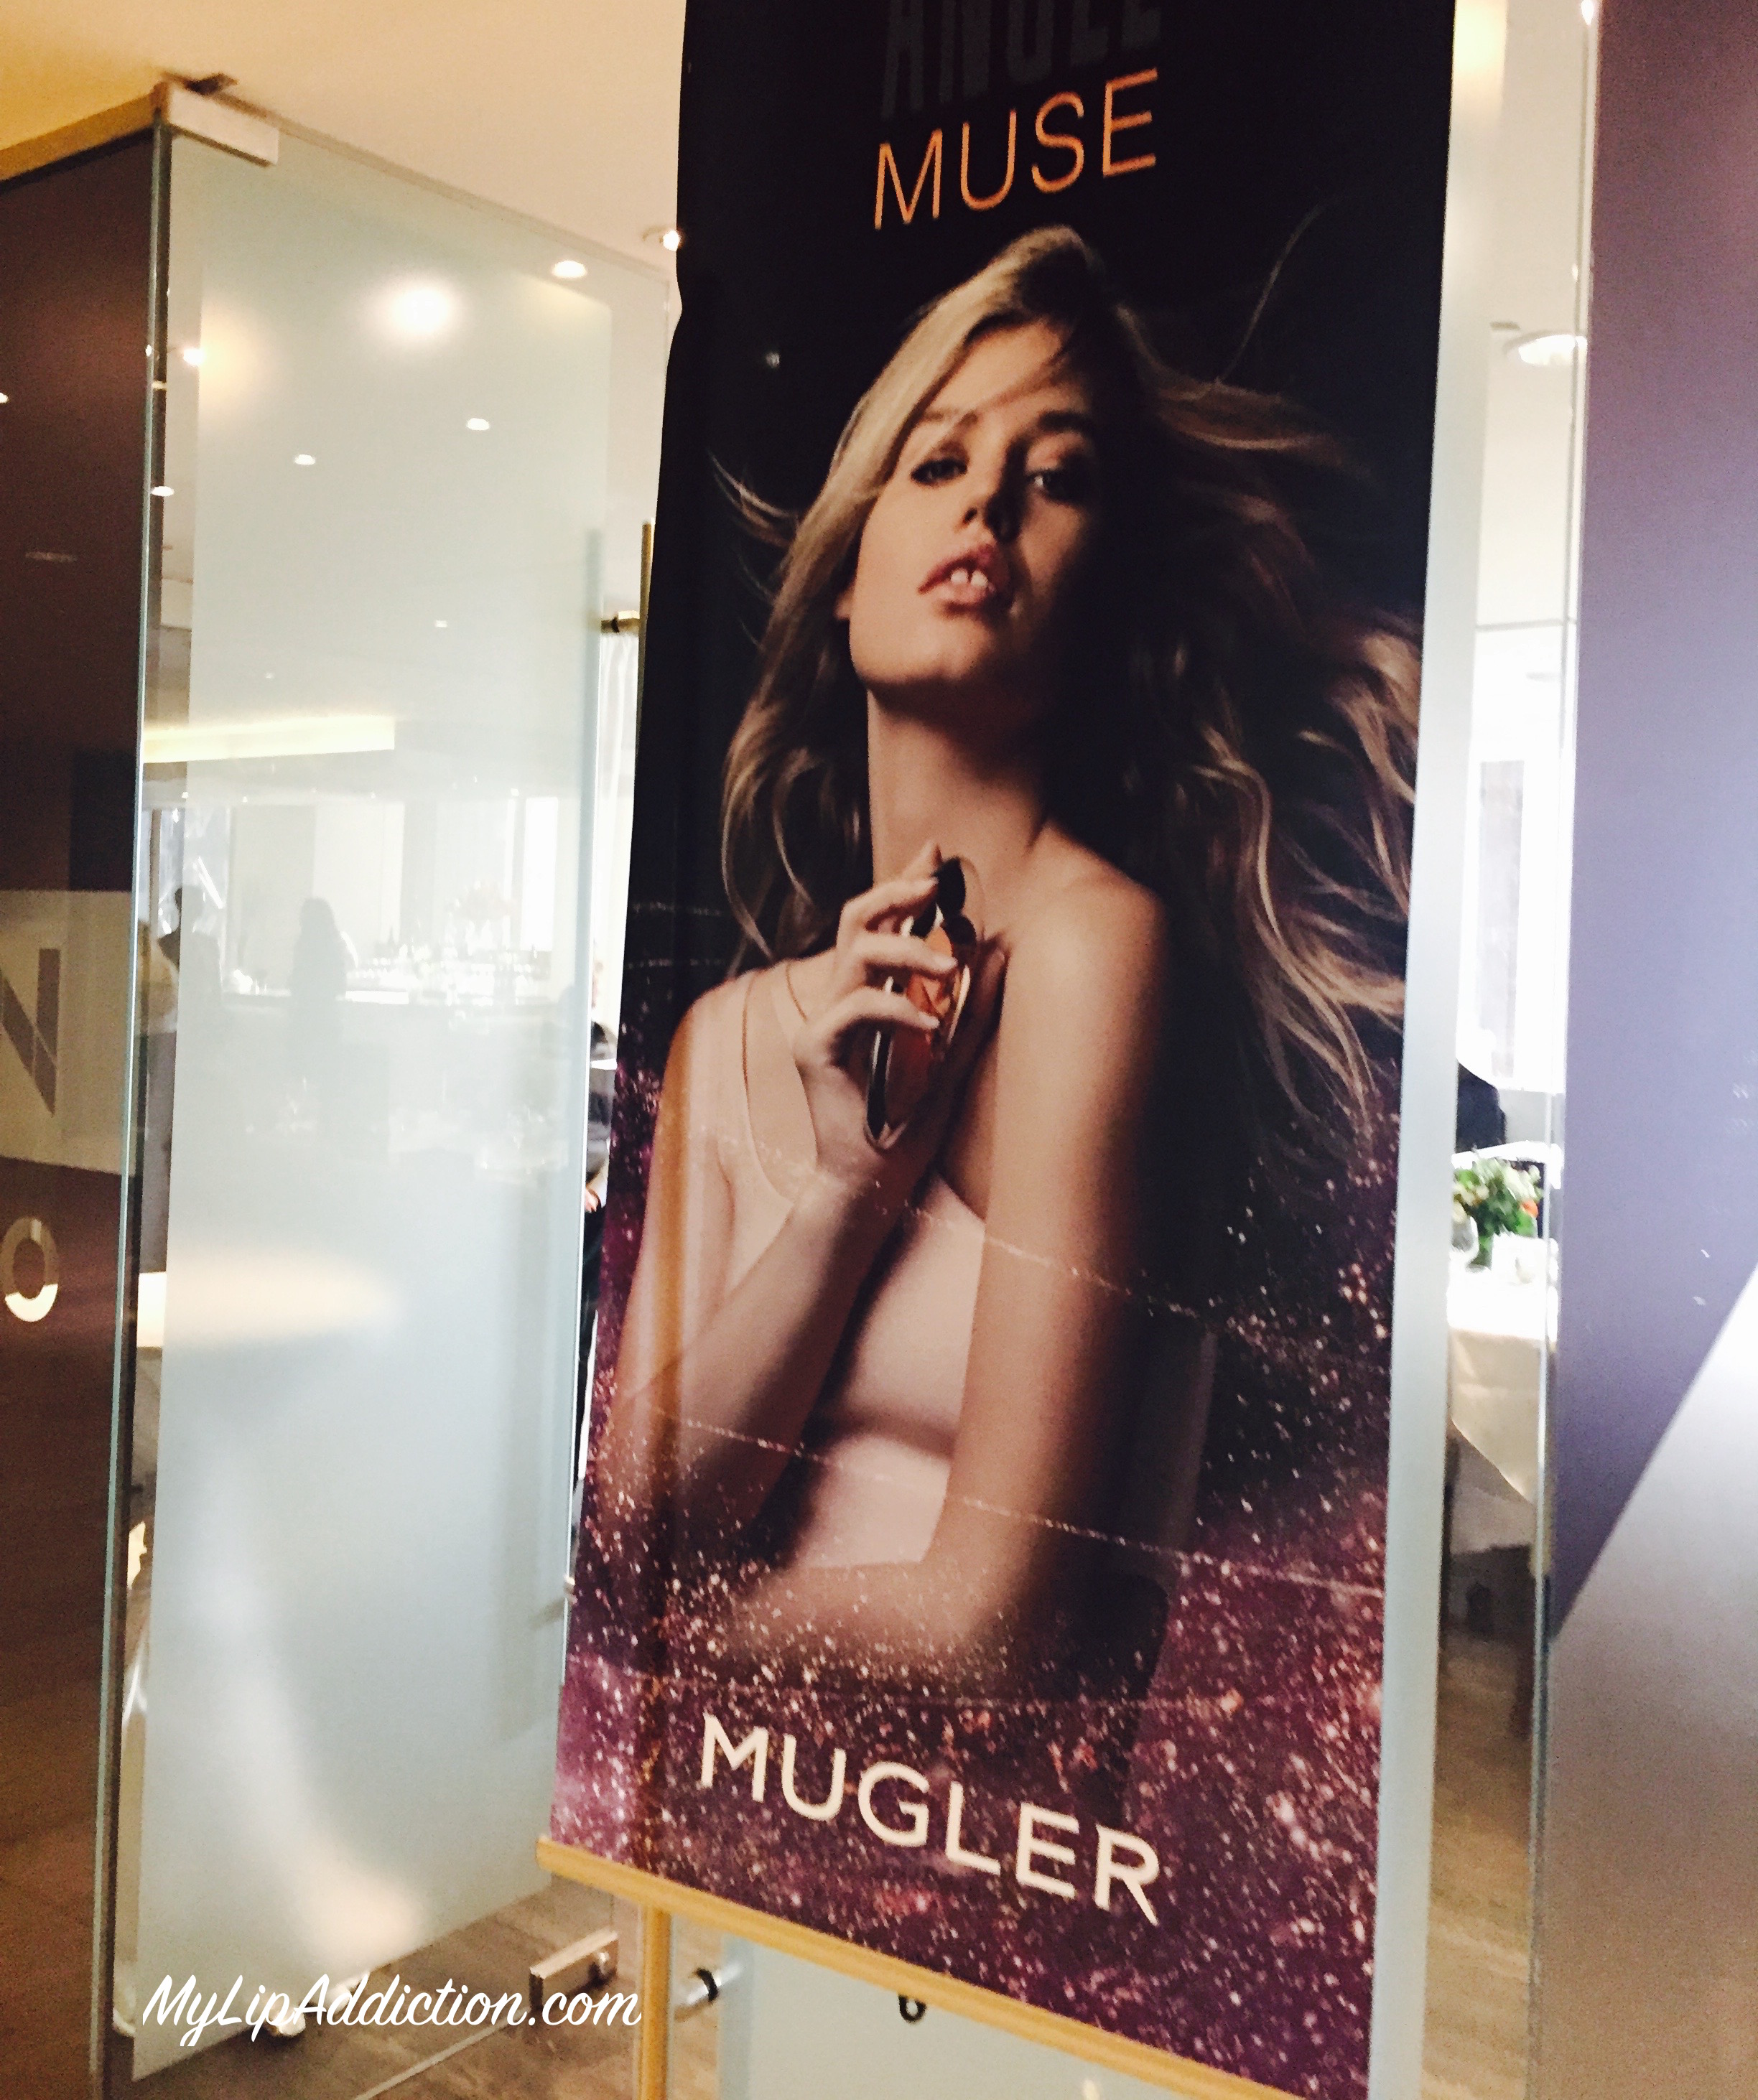 #AngelMuse -Fragrance Launch - Mugler - A Fabulous Evening Hosted by Dave Lackie - MyLipAddiction.com